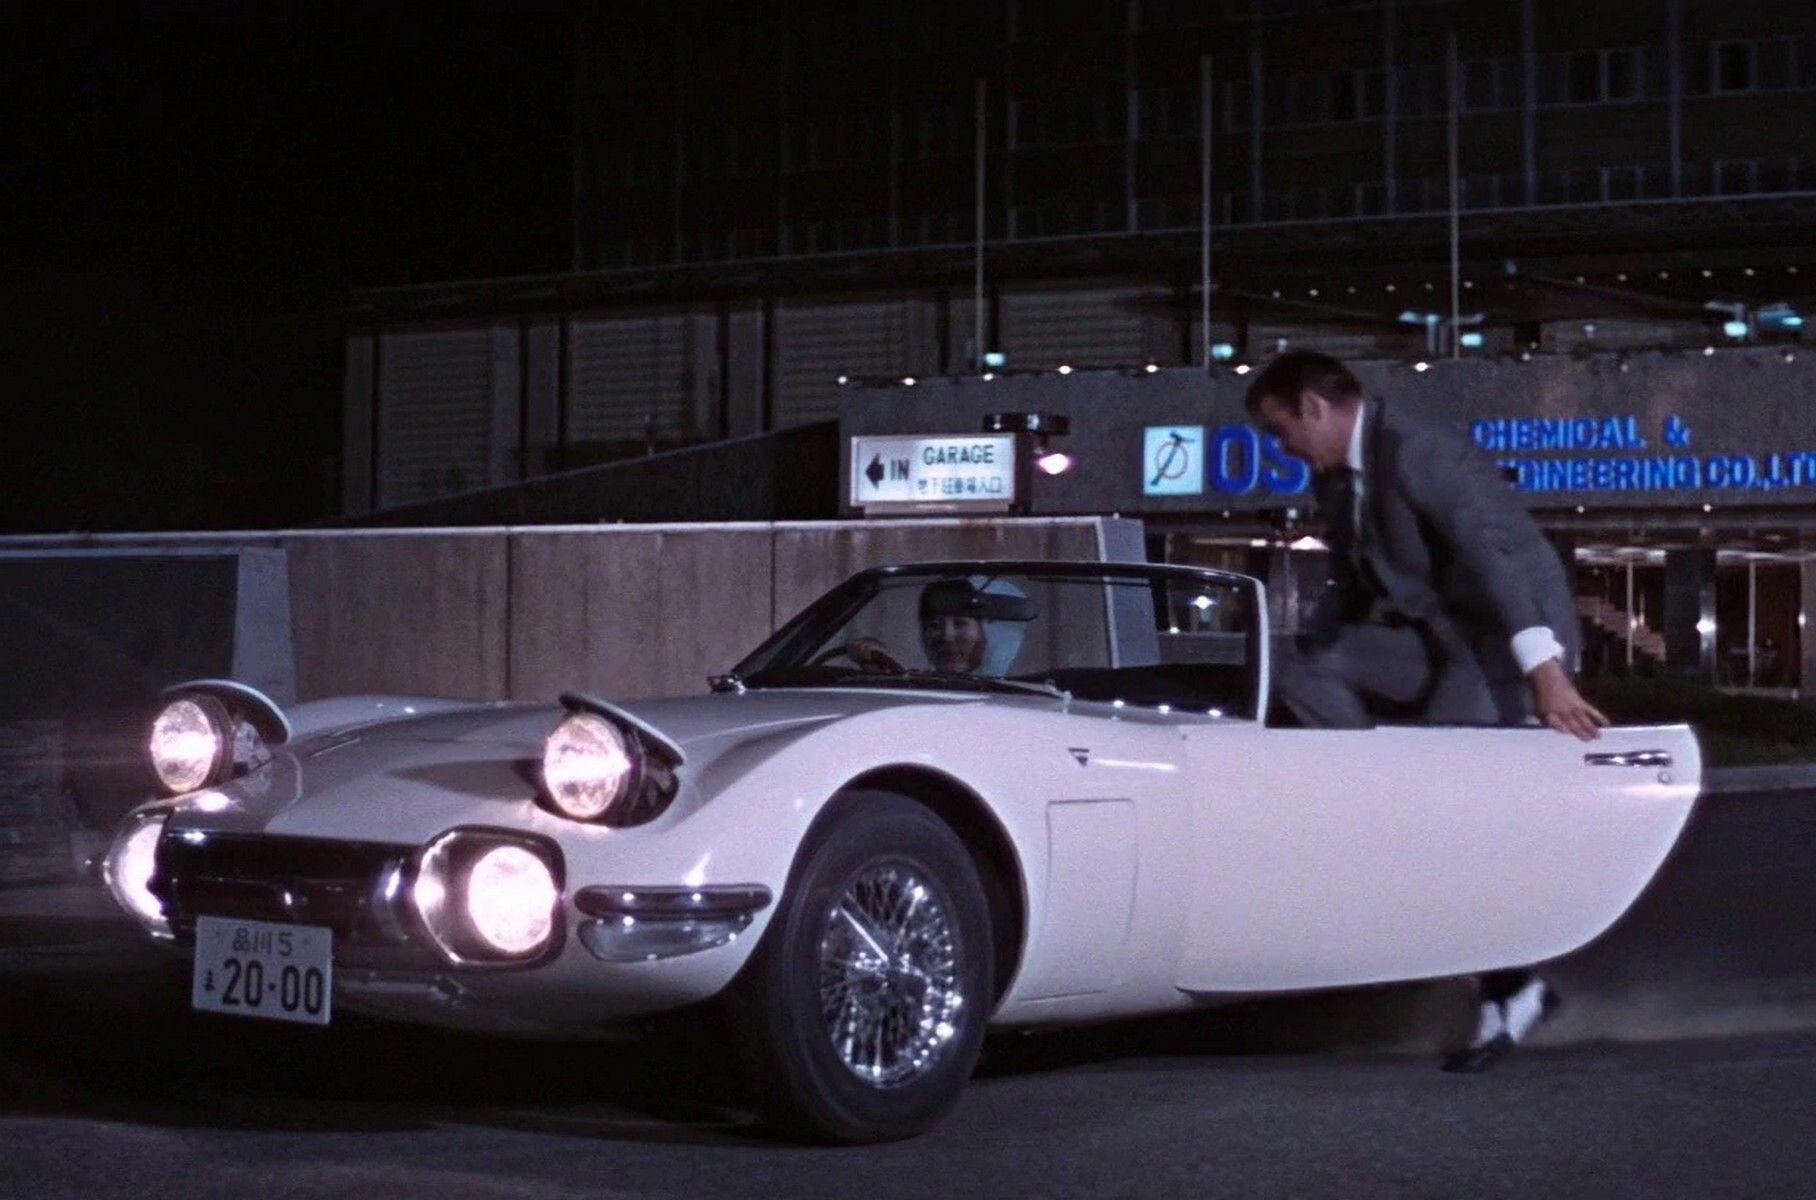 What car did James Bond drive in You Only Live Twice?